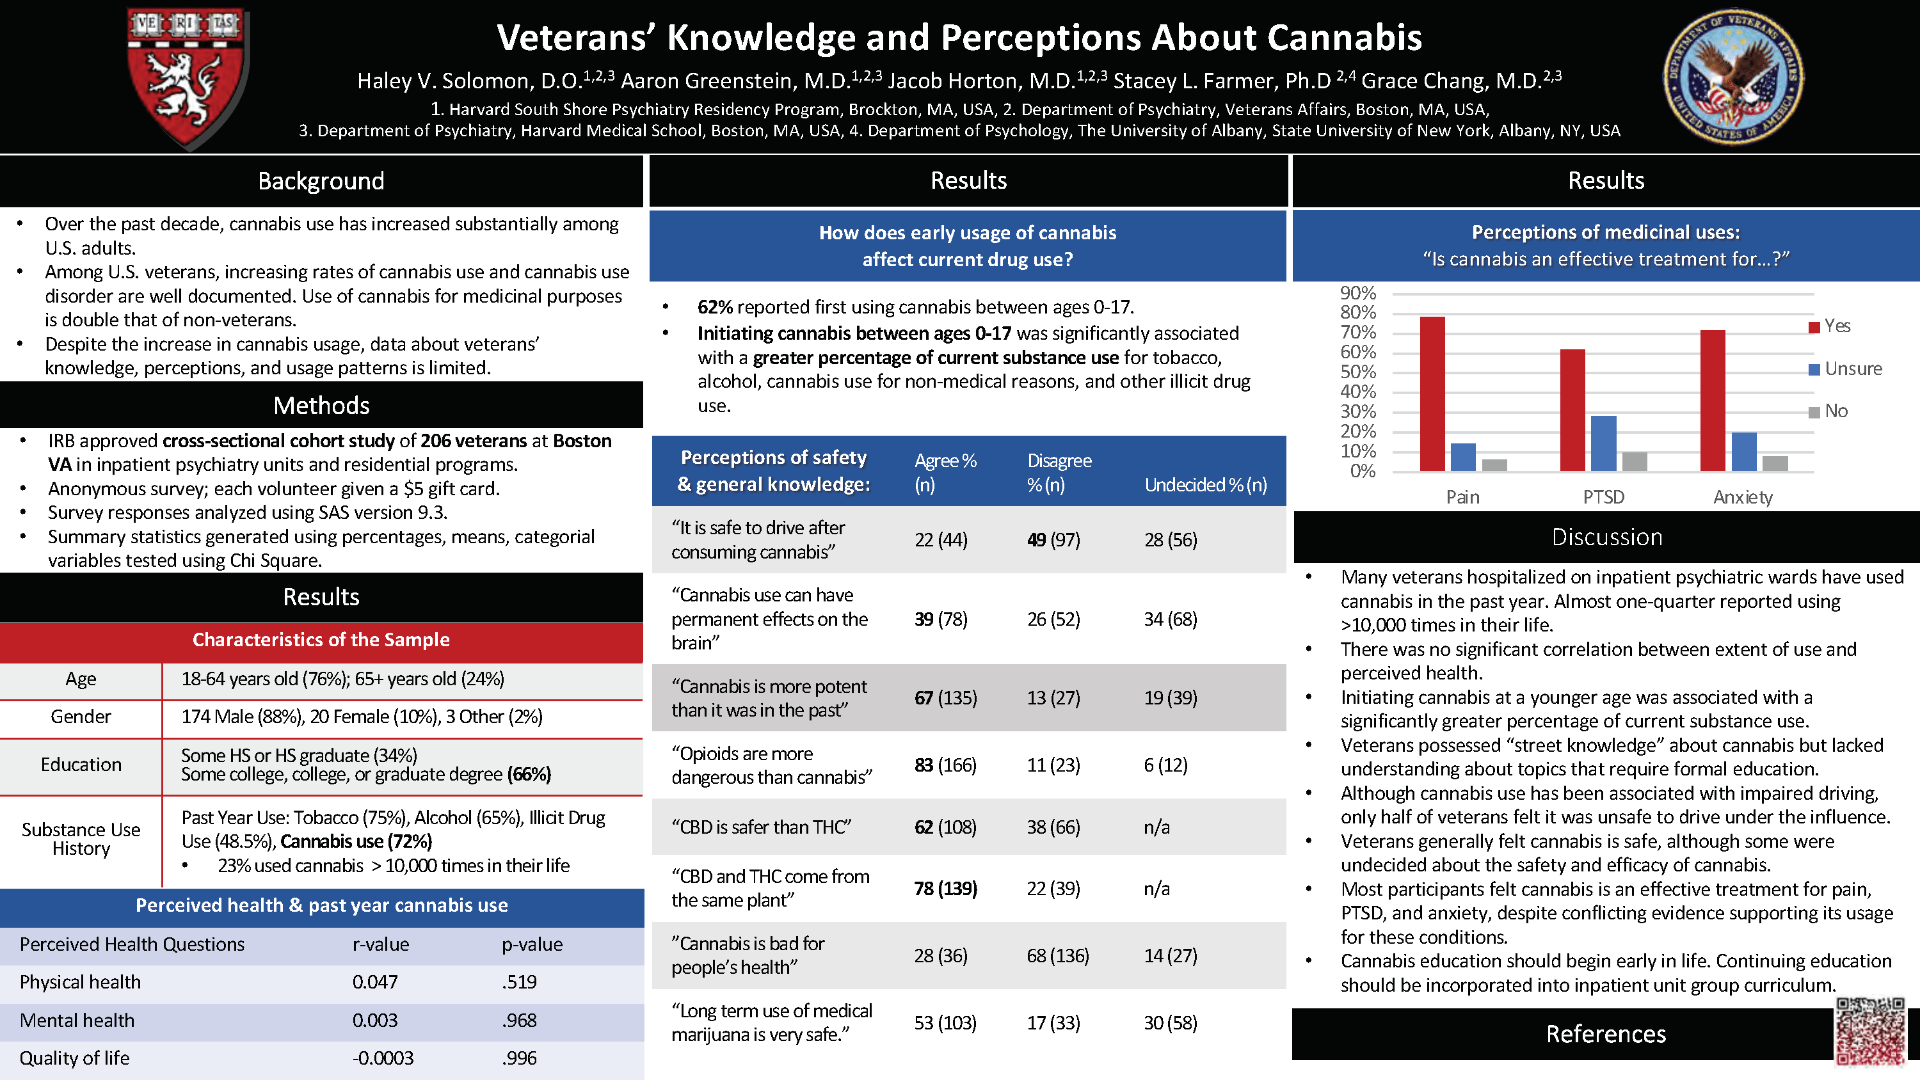 Veterans’ Knowledge and Perceptions About Cannabis